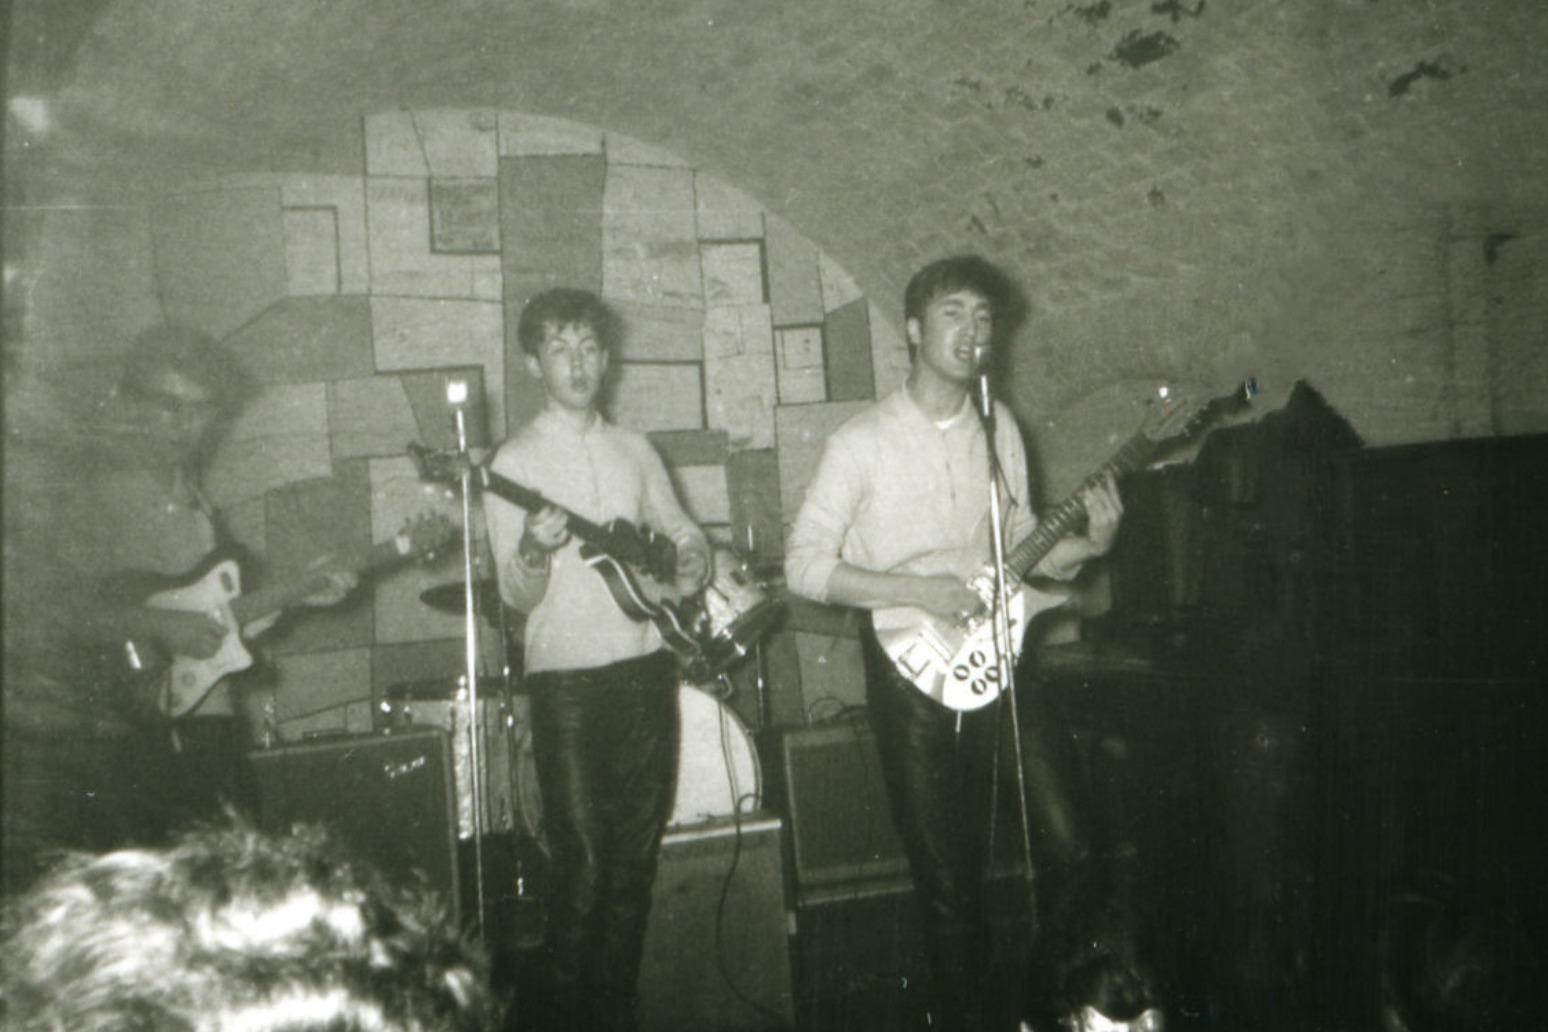 Rare photographs of The Beatles playing at Liverpool’s Cavern Club uncovered 